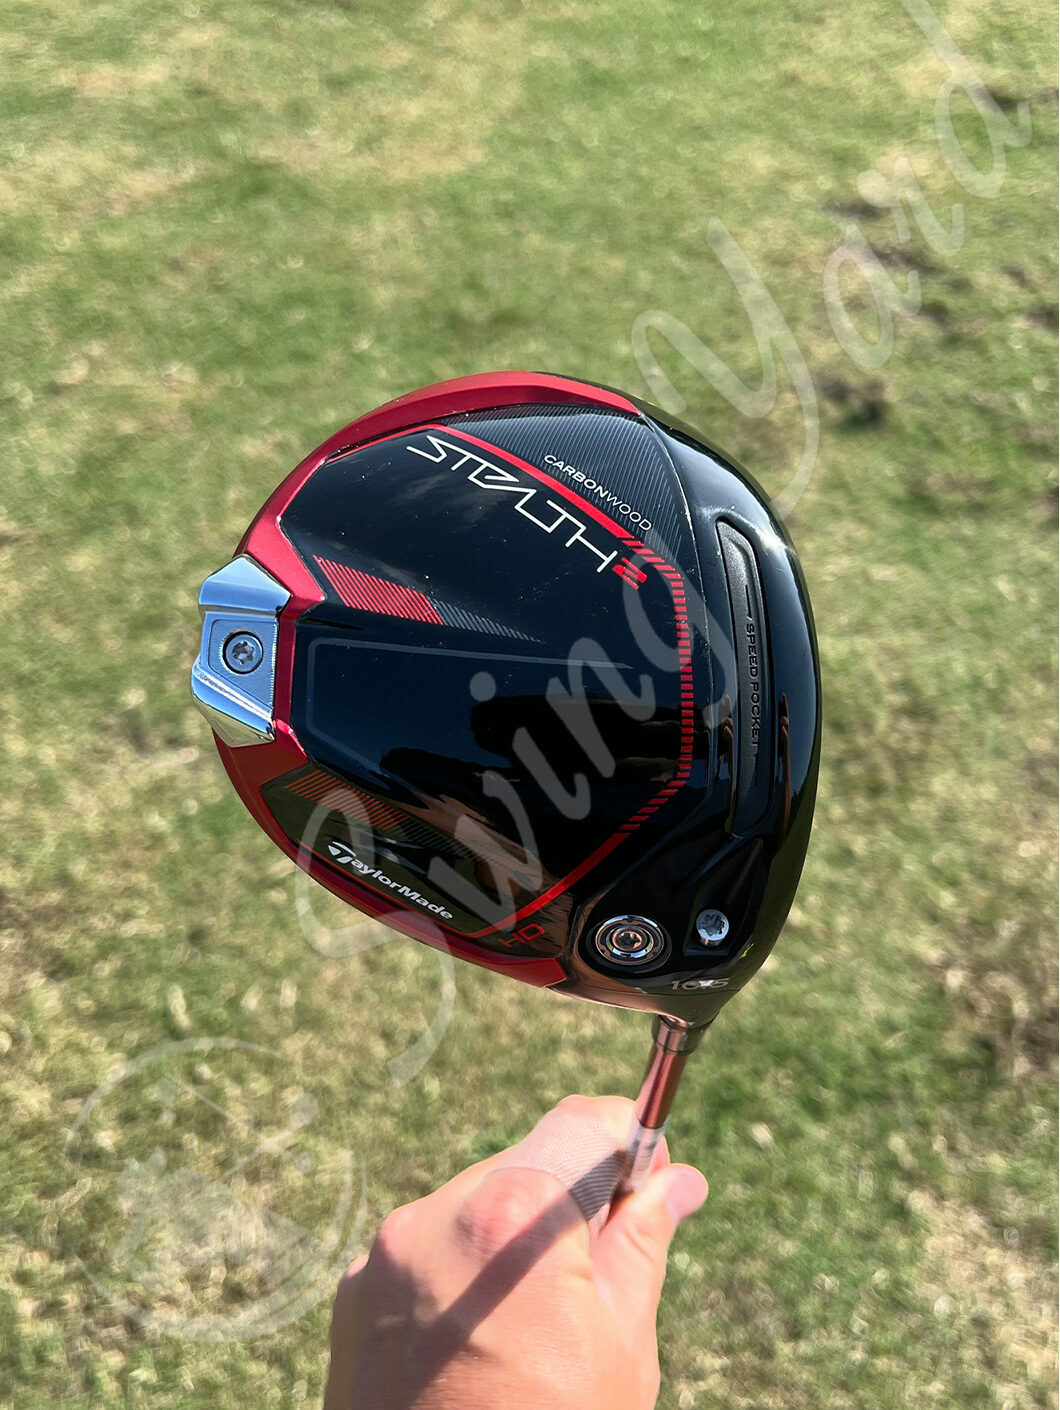 Me holding TaylorMade Stealth 2 HD driver for testing at the golf course